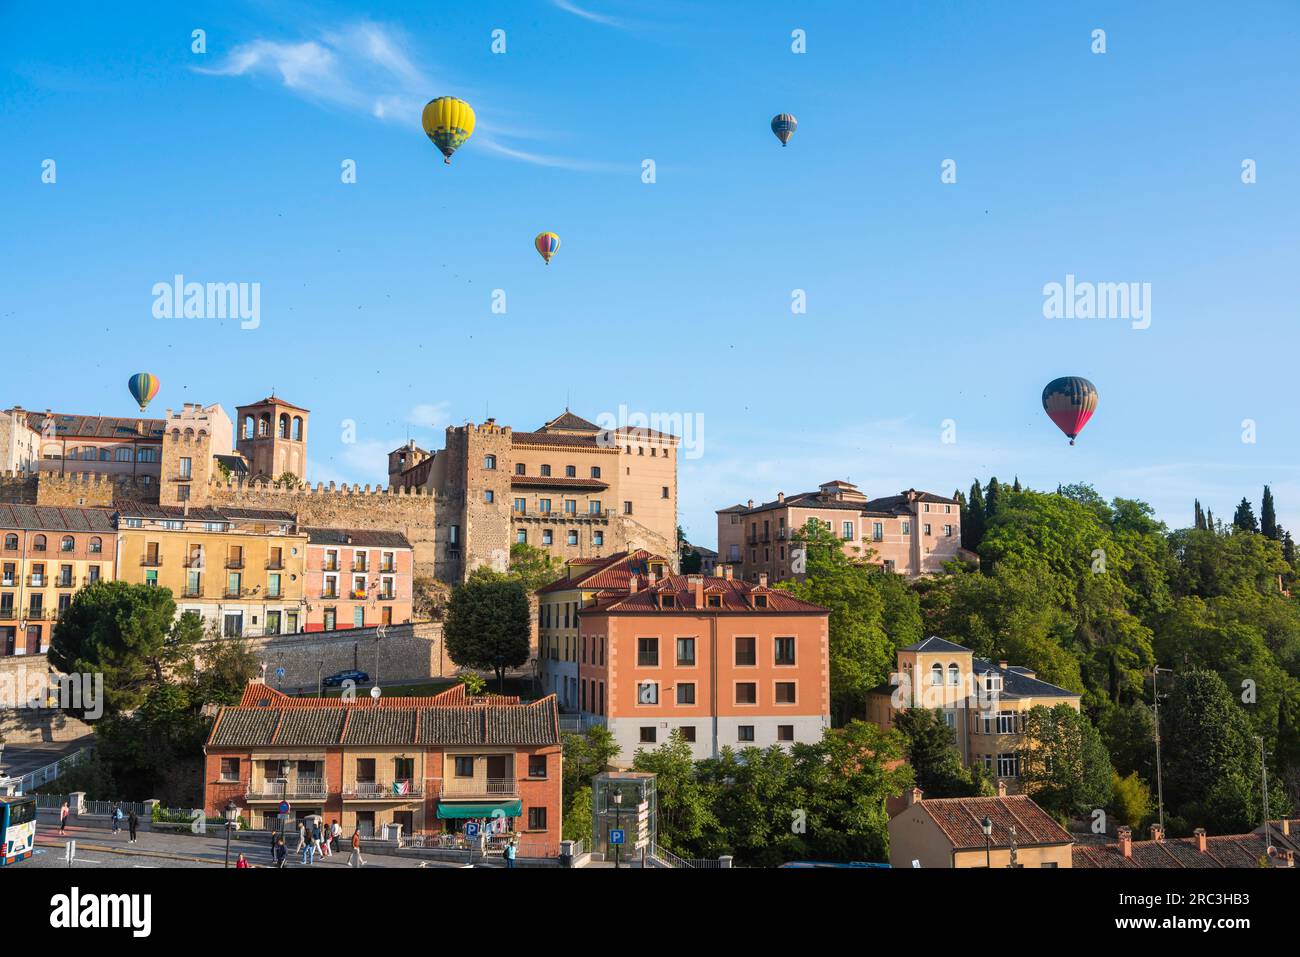 Hot air balloon Spain, view in summer of hot air balloons floating over the historic Old Town quarter of the city of Segovia, central Spain Stock Photo